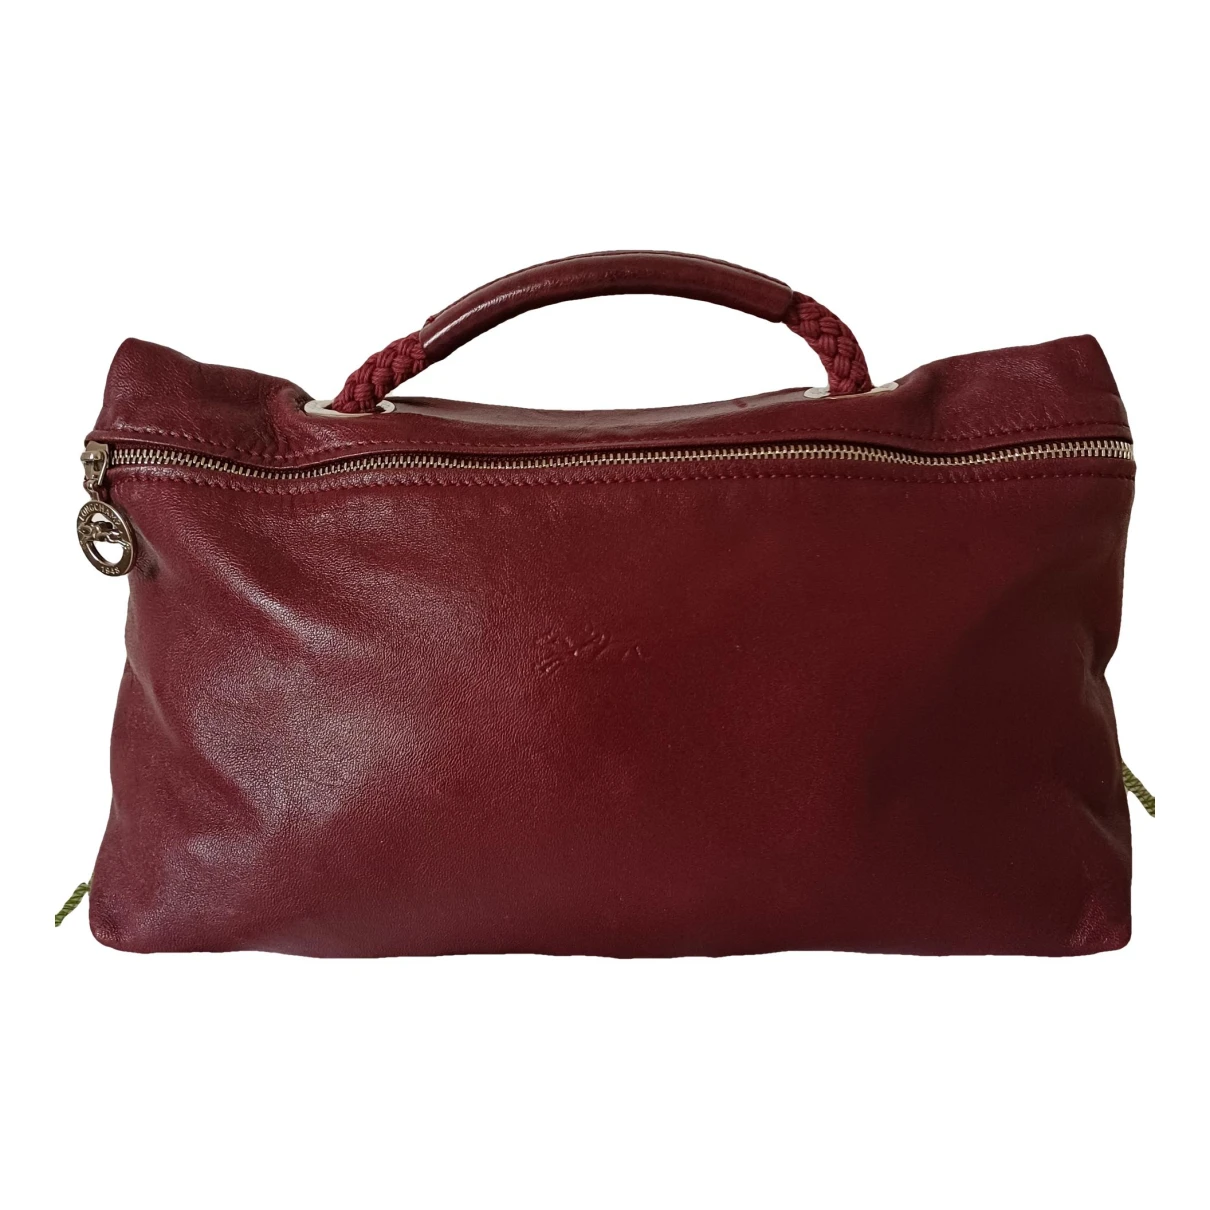 Pre-owned Longchamp Pliage Leather Handbag In Burgundy